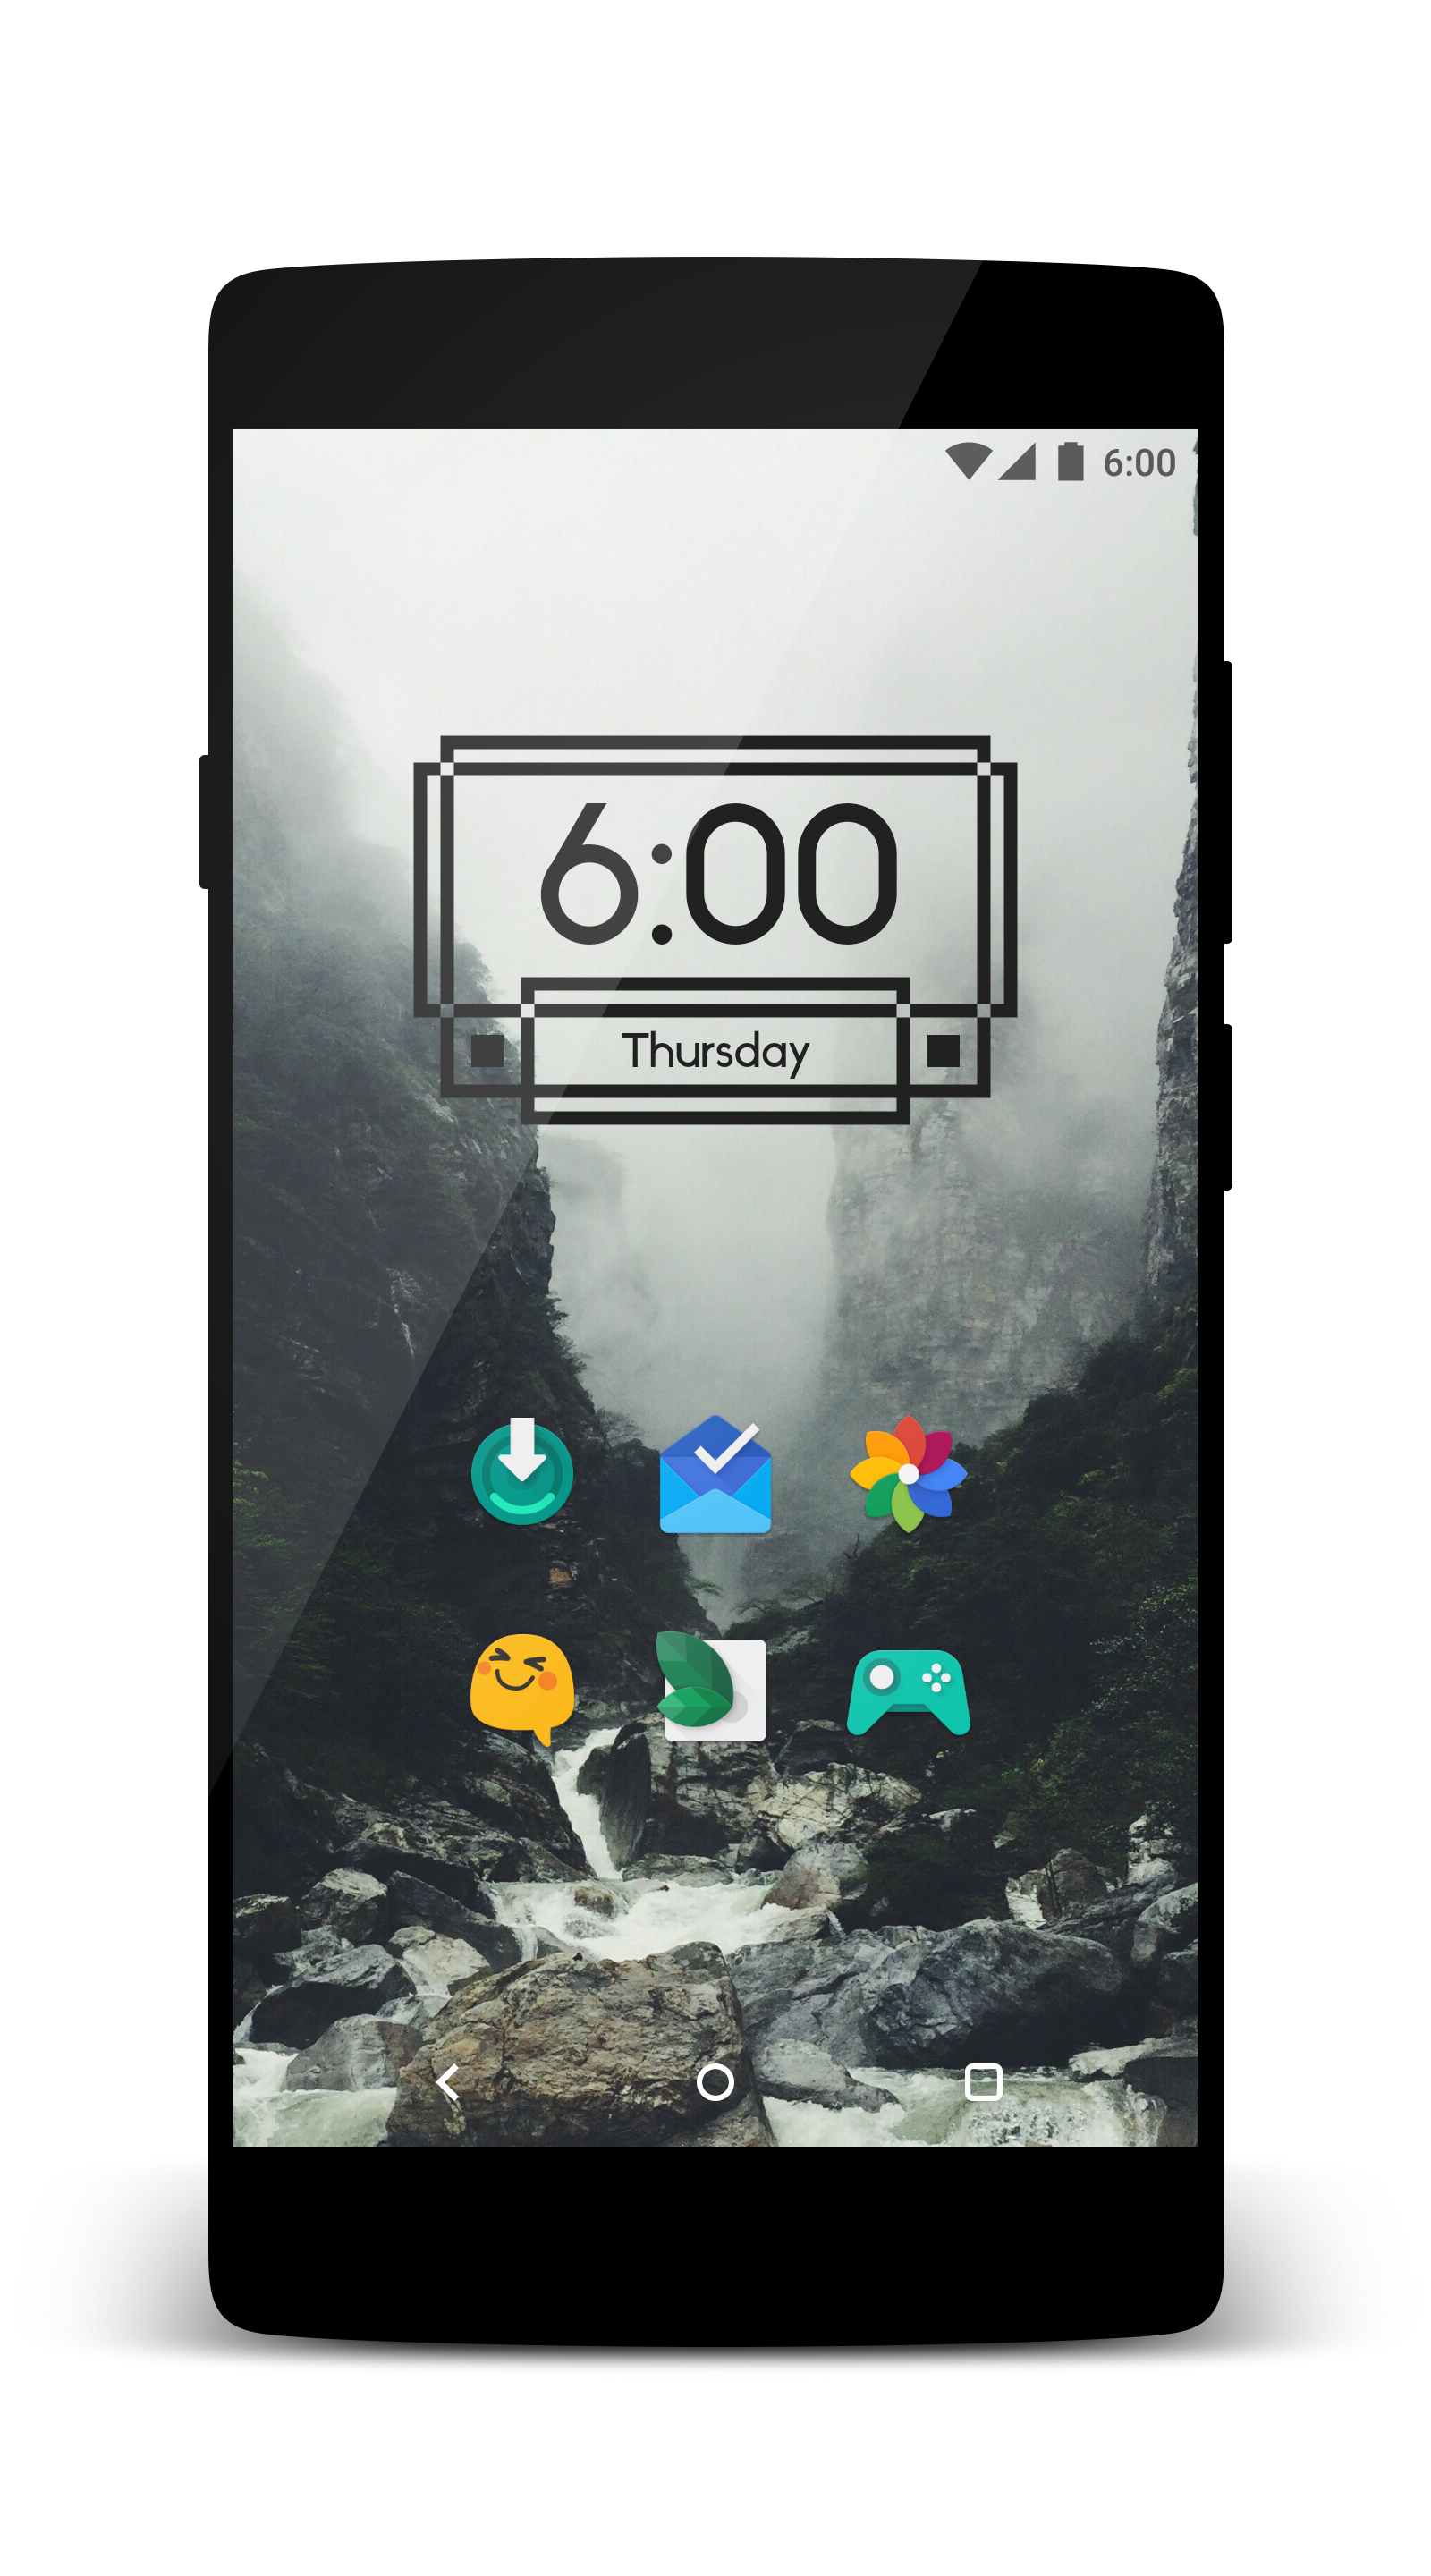 Android application CandyCons - Icon Pack screenshort